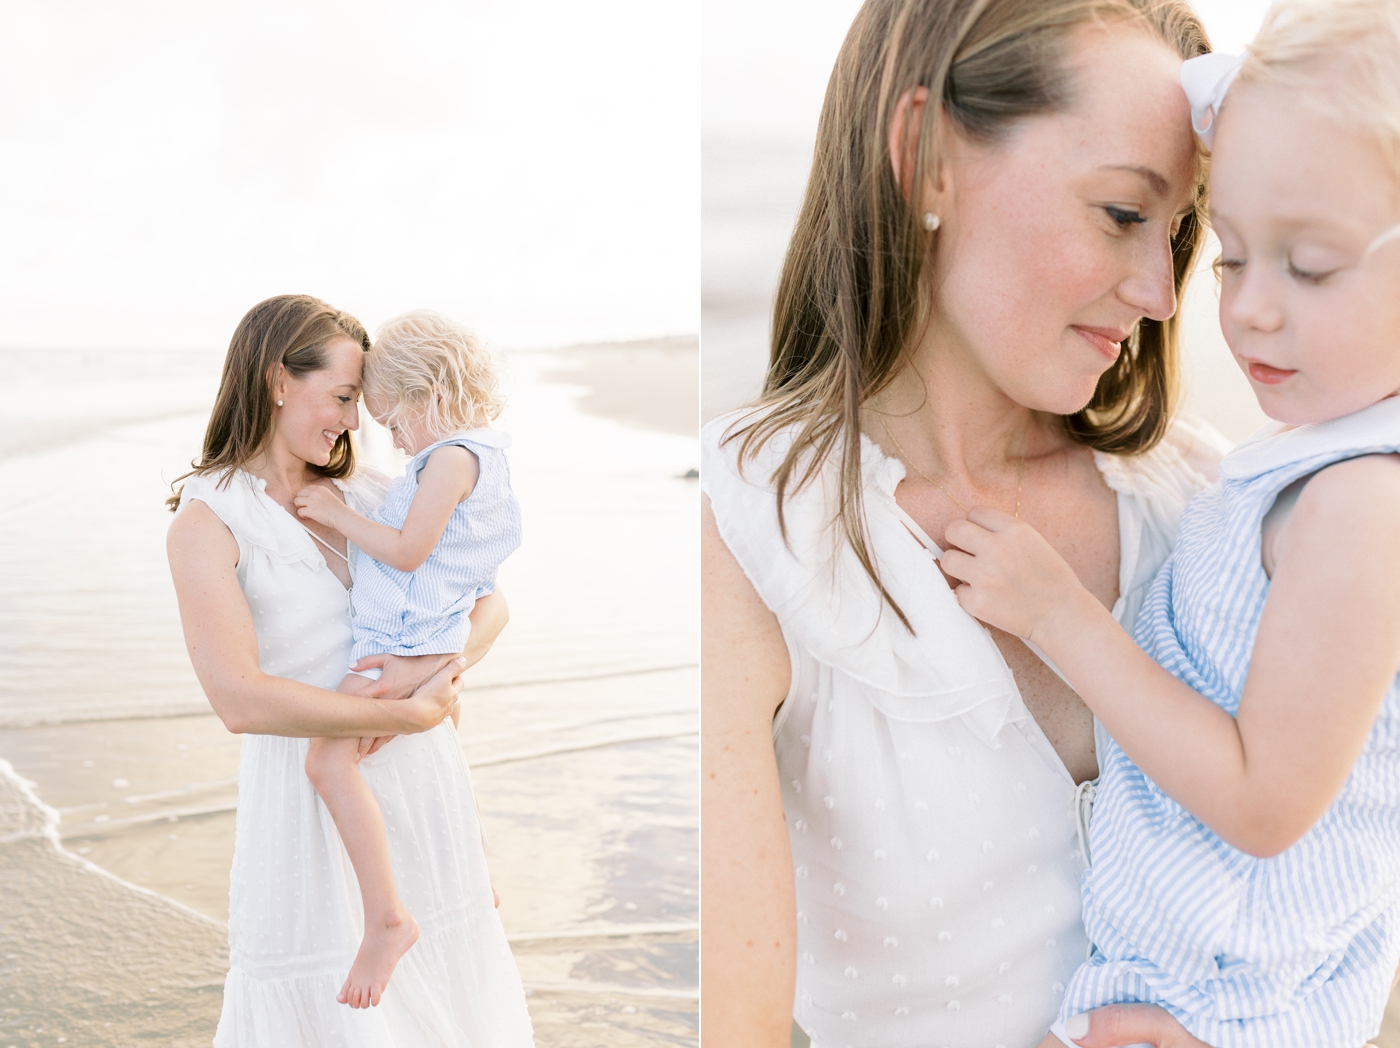 Mom holding her daughter on the beach | Photo by Caitlyn Motycka Photography.